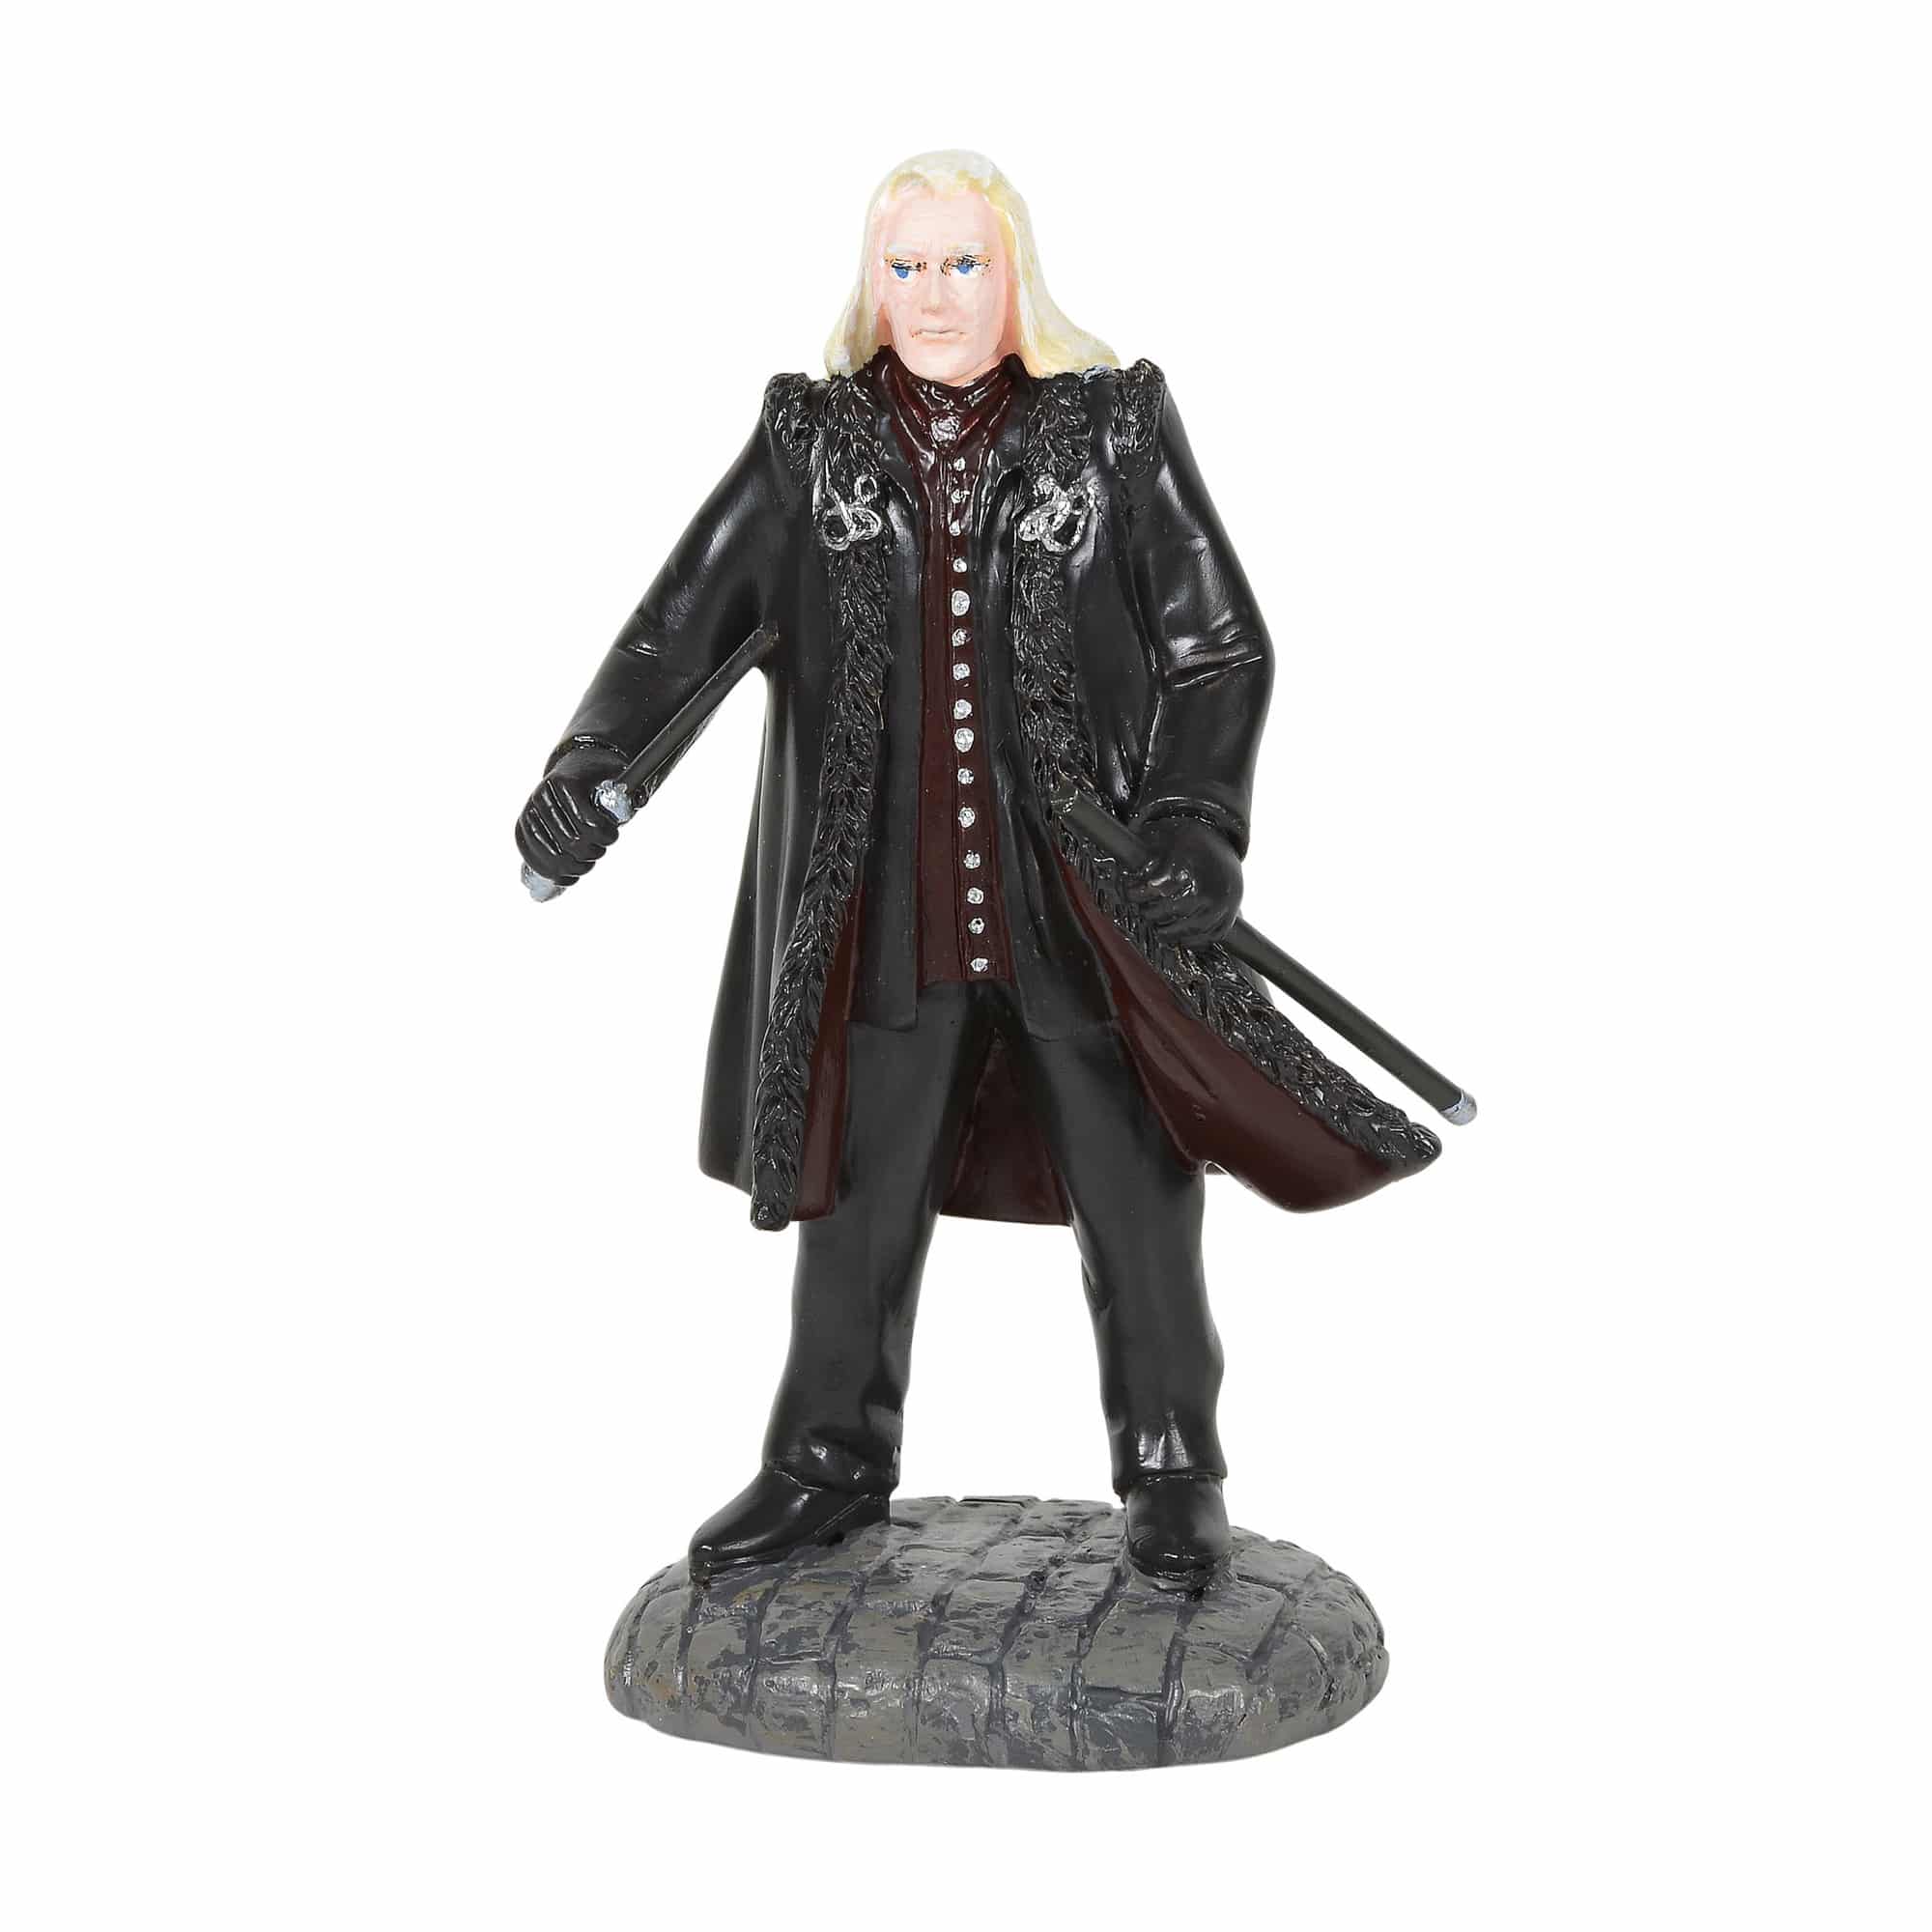 Dept 56 Harry Potter Lucius Malfoy Christmas Store